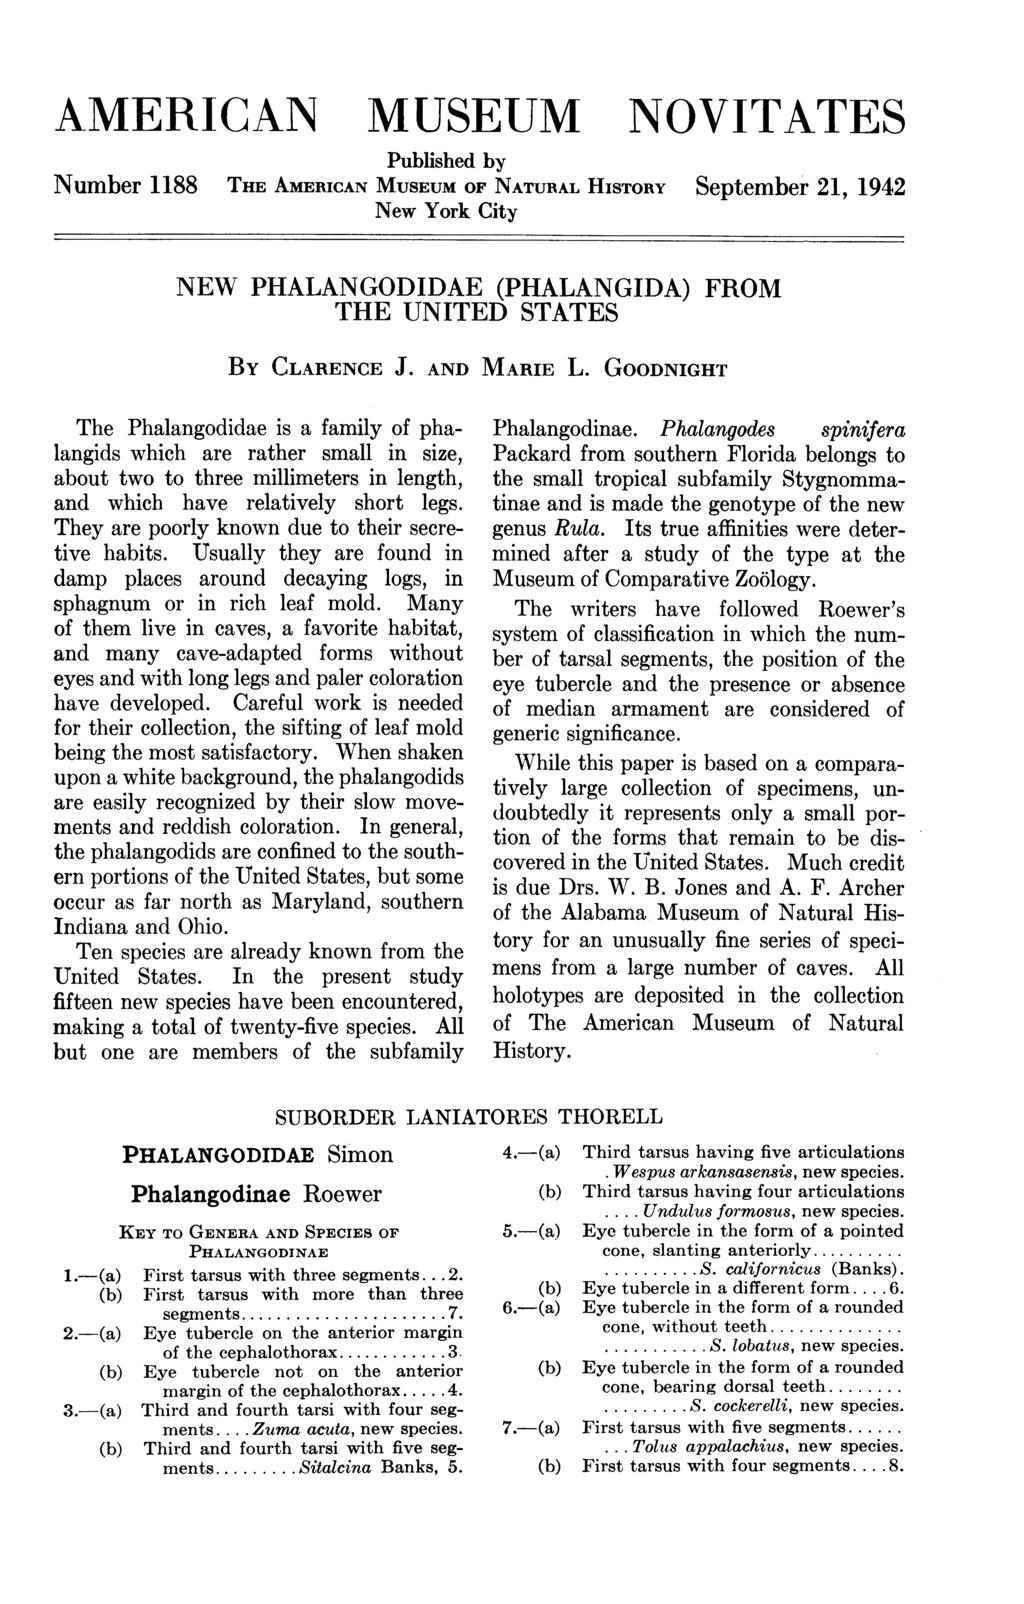 AMERCAN MUSEUM NOVTATES Published by Number 1188 THE AMERCAN MUSEUM OF NATURAL HSTORY September 21, 1942 New York City NEW PHALANGODDAE (PHALANGDA) FROM THE UNTED STATES BY CLARENCE J. AND MARE L.